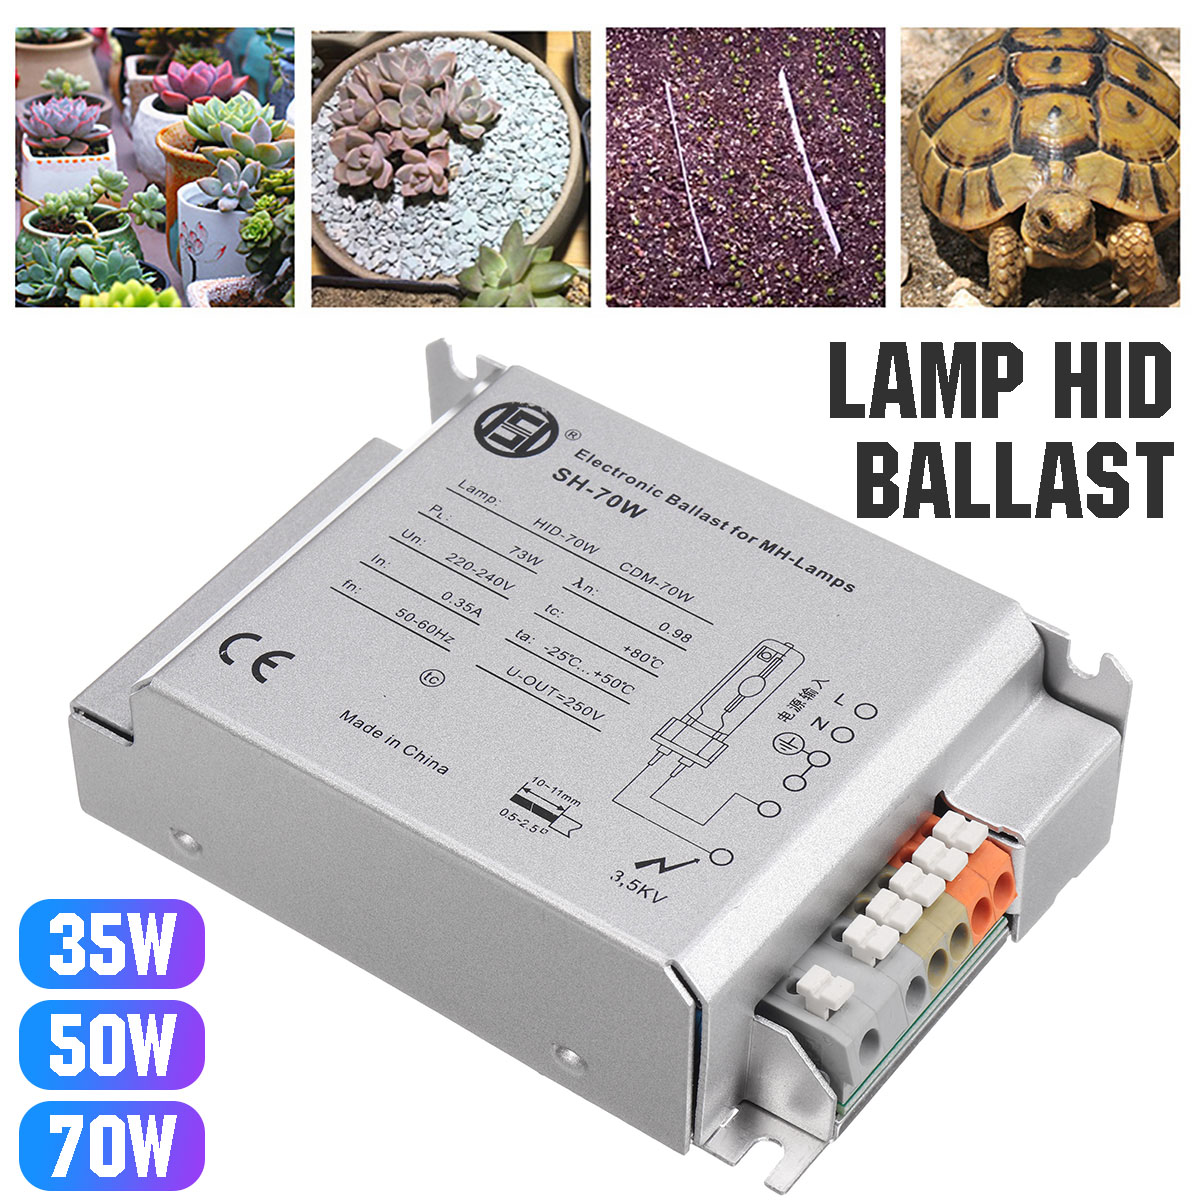 35W50W70W-Electronic-Dimmable-Ballast-For-Repitle-UVB-Metal-Hanlide-Bulb-1804143-3